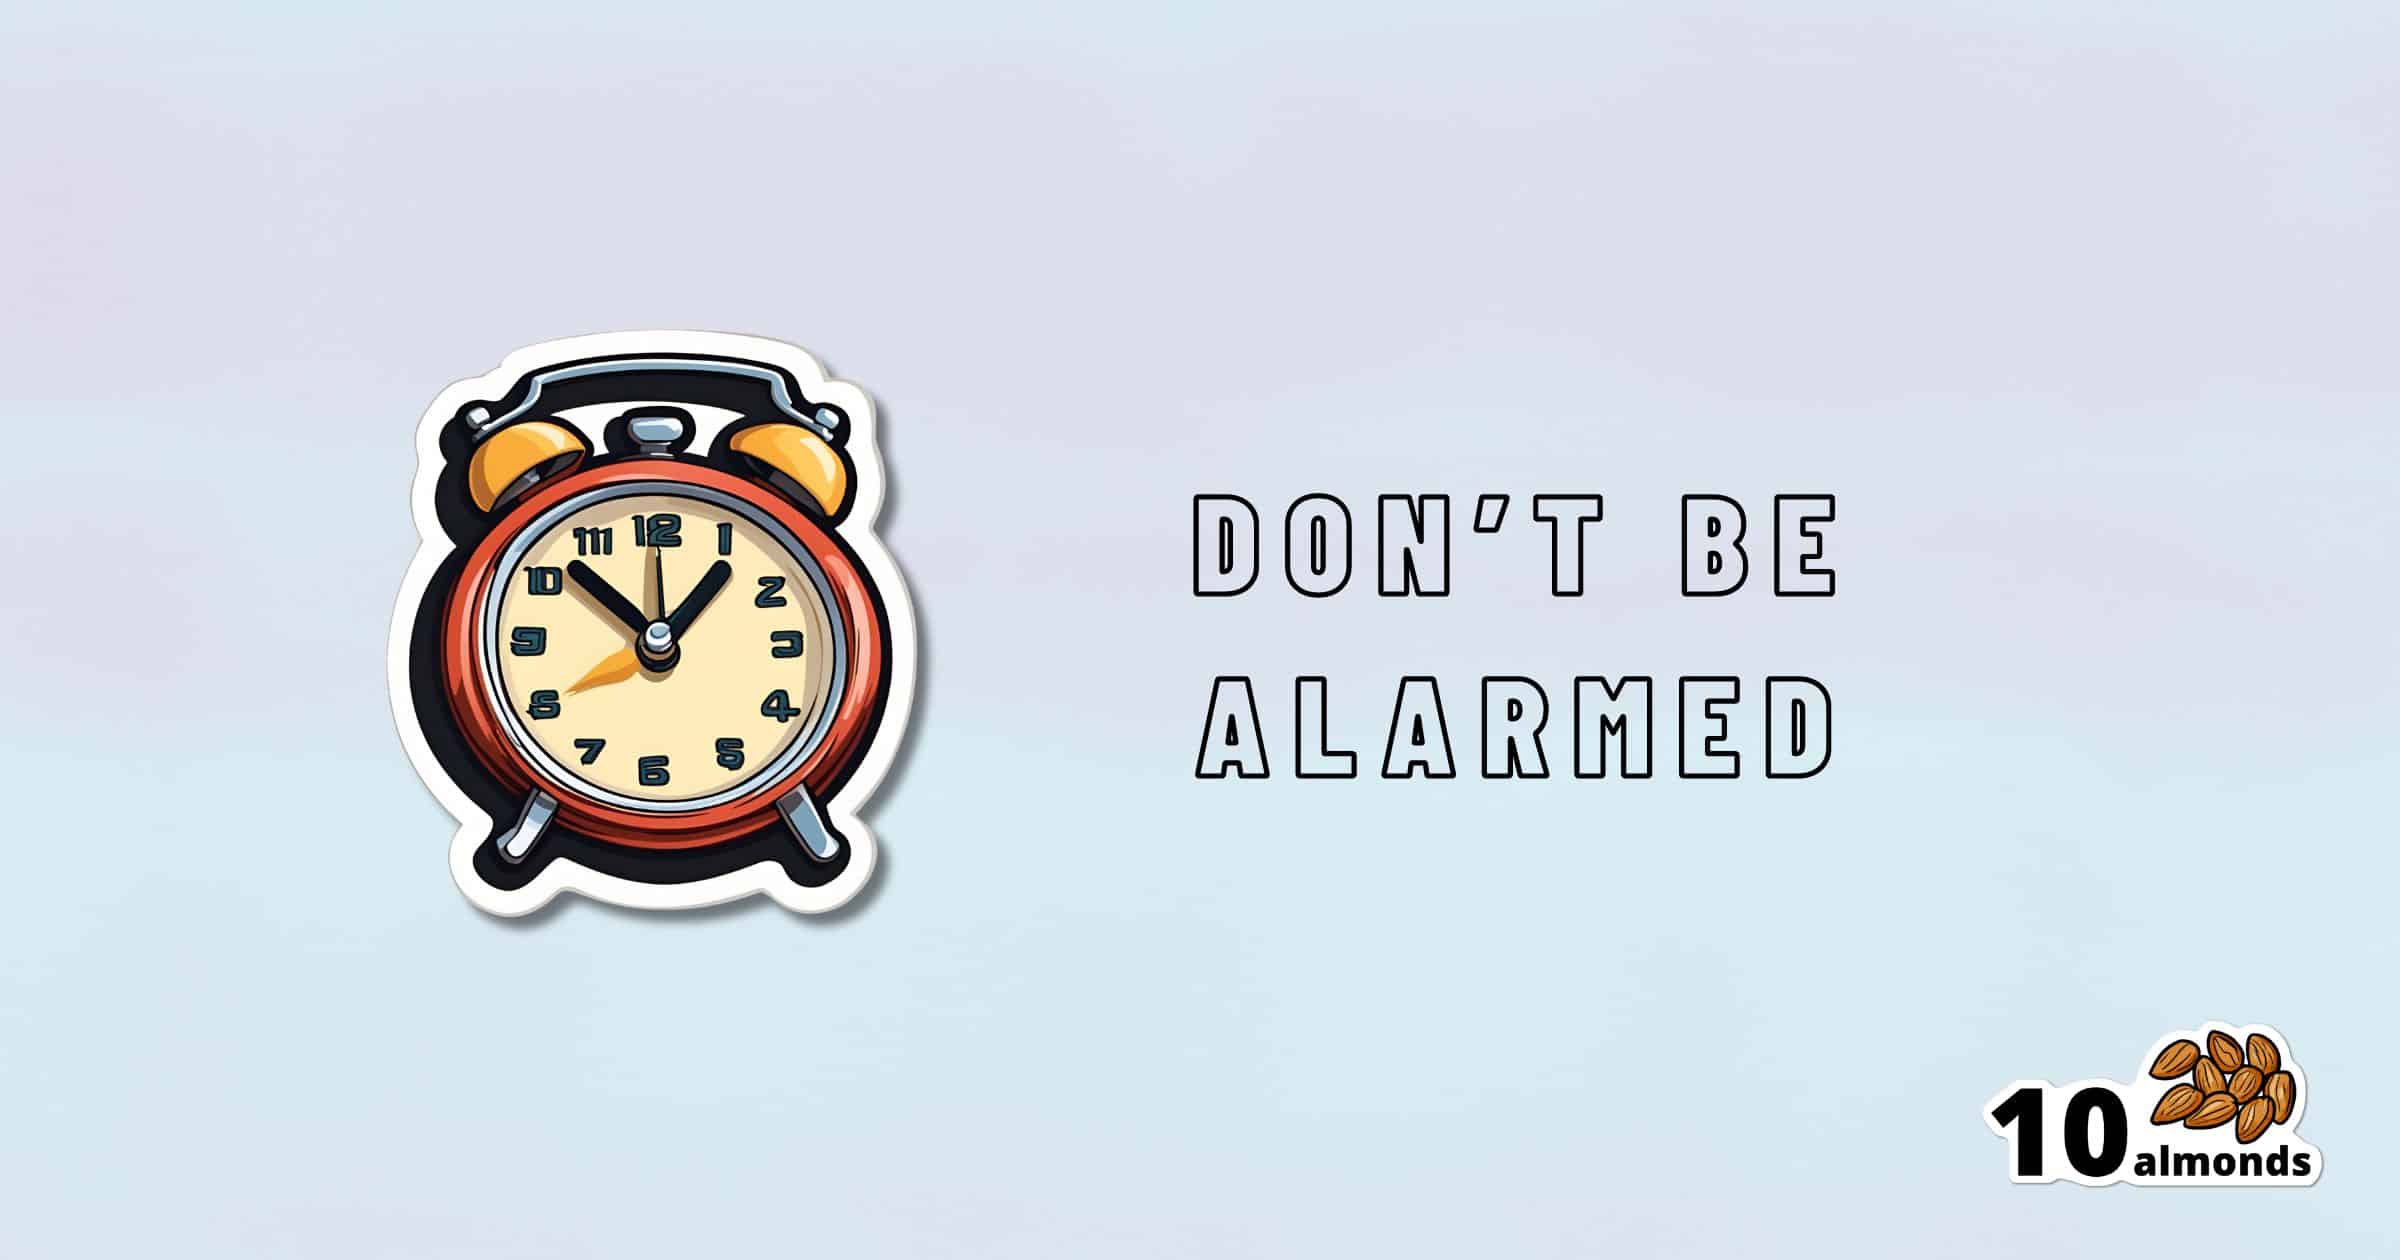 A graphic features an illustration of a vintage alarm clock with a text that reads, "DON'T BE ALARMED – Worst Way to Wake Up." In the lower right corner, there is an icon with the number "10" and a small bunch of almonds below it. The background is a gradient mix of light blue and purple.